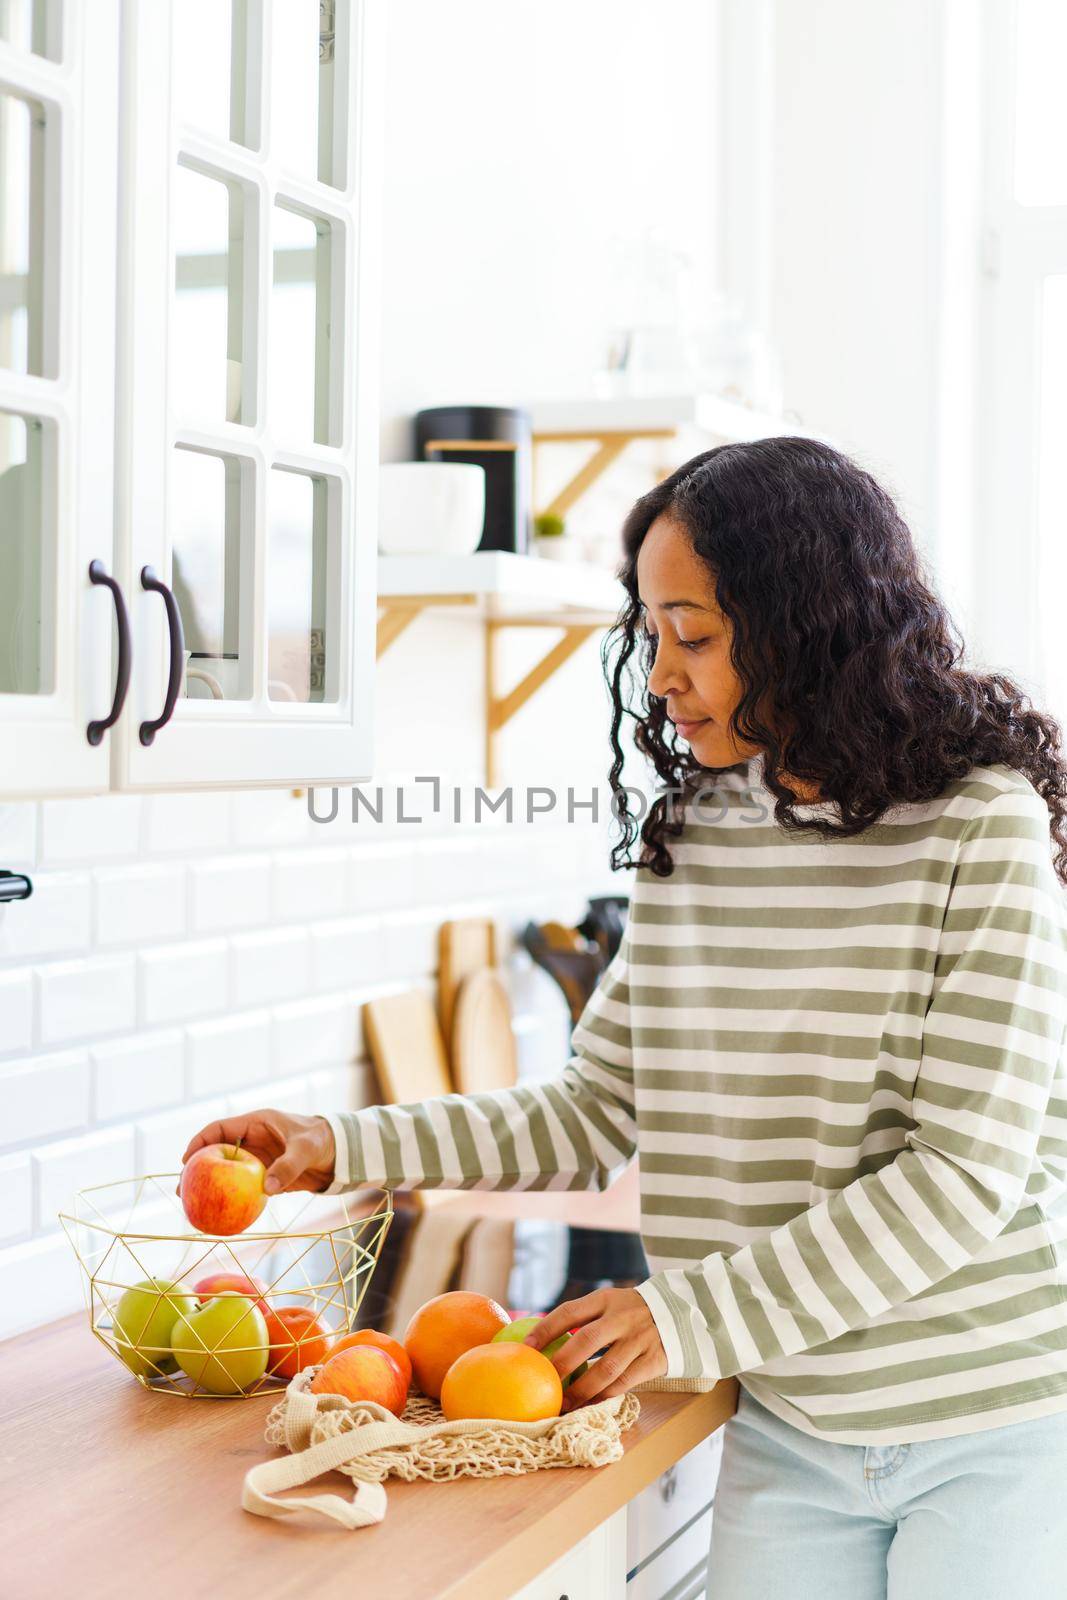 African-American woman sorting green and red apples with oranges after shopping in grocery store. Concept of healthy vegan products. Dietary fruits and citrus. Sweet nutritious snack